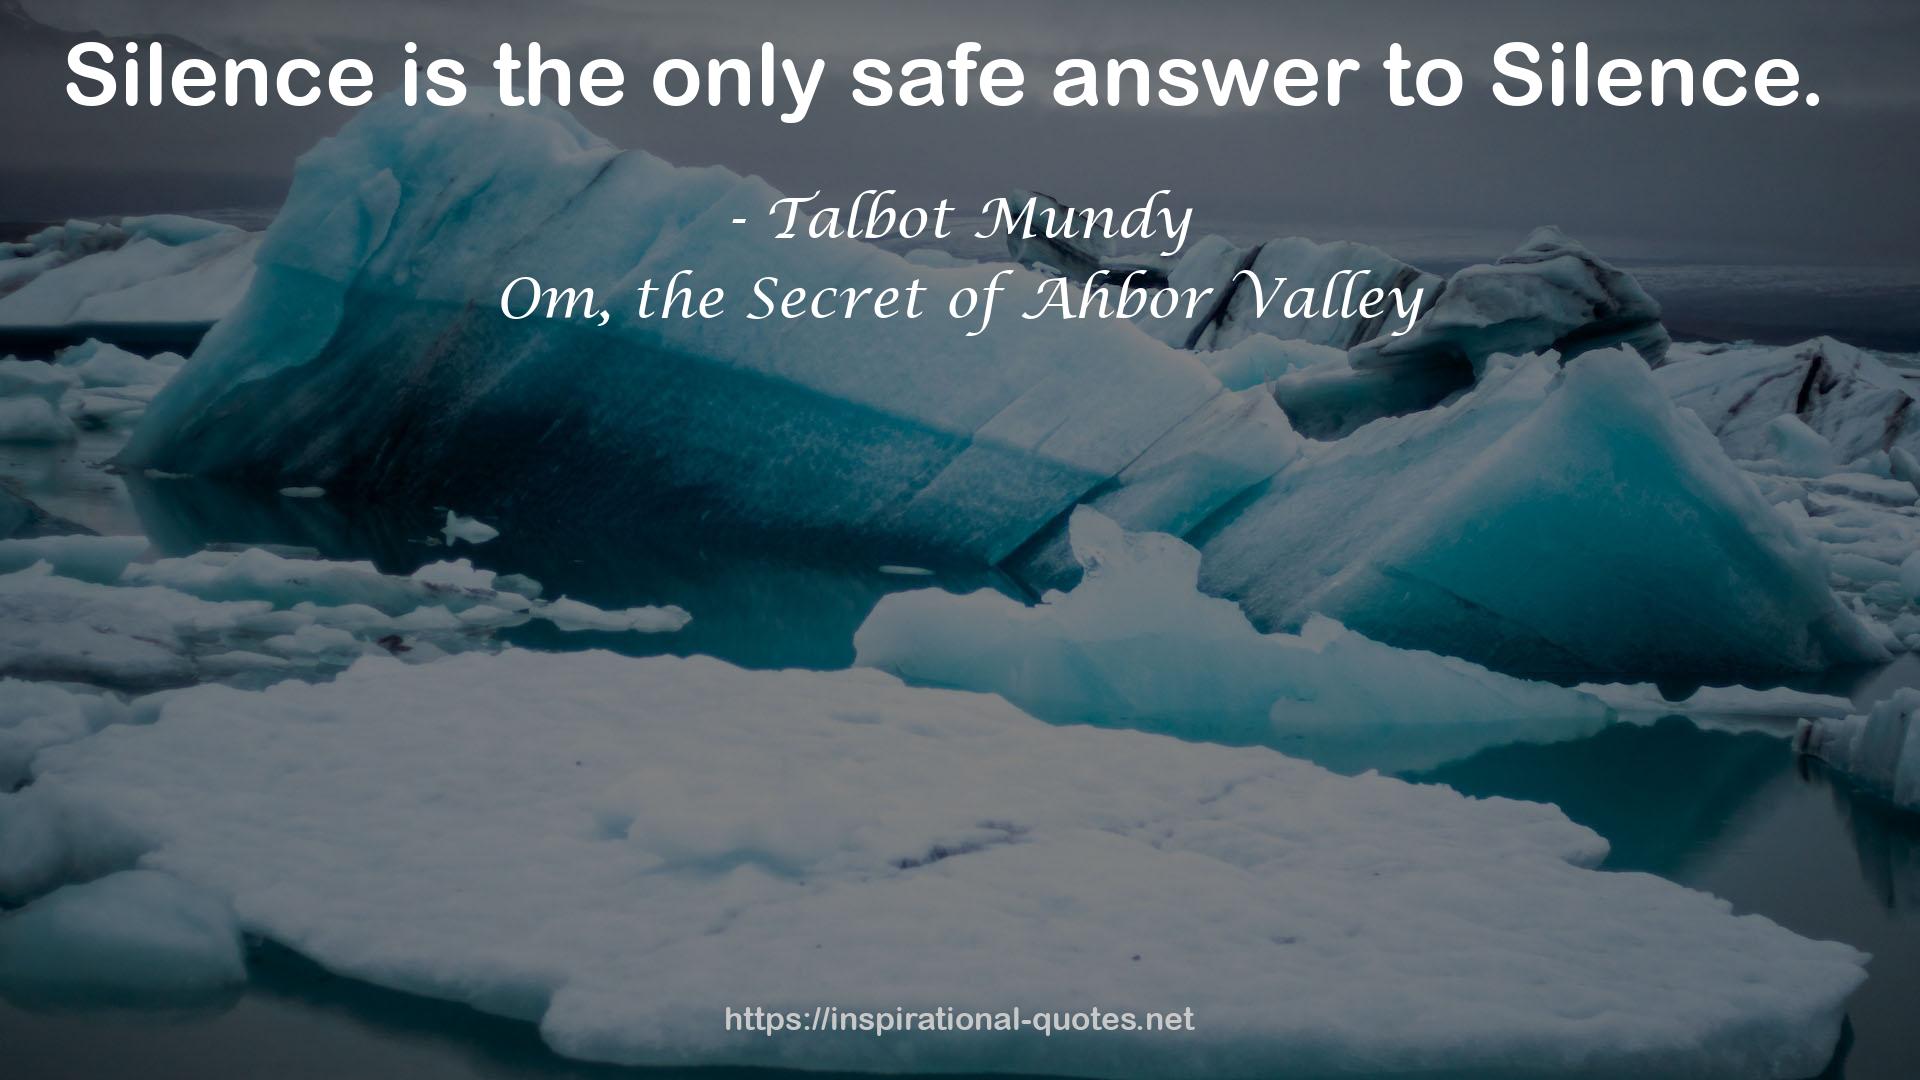 Om, the Secret of Ahbor Valley QUOTES